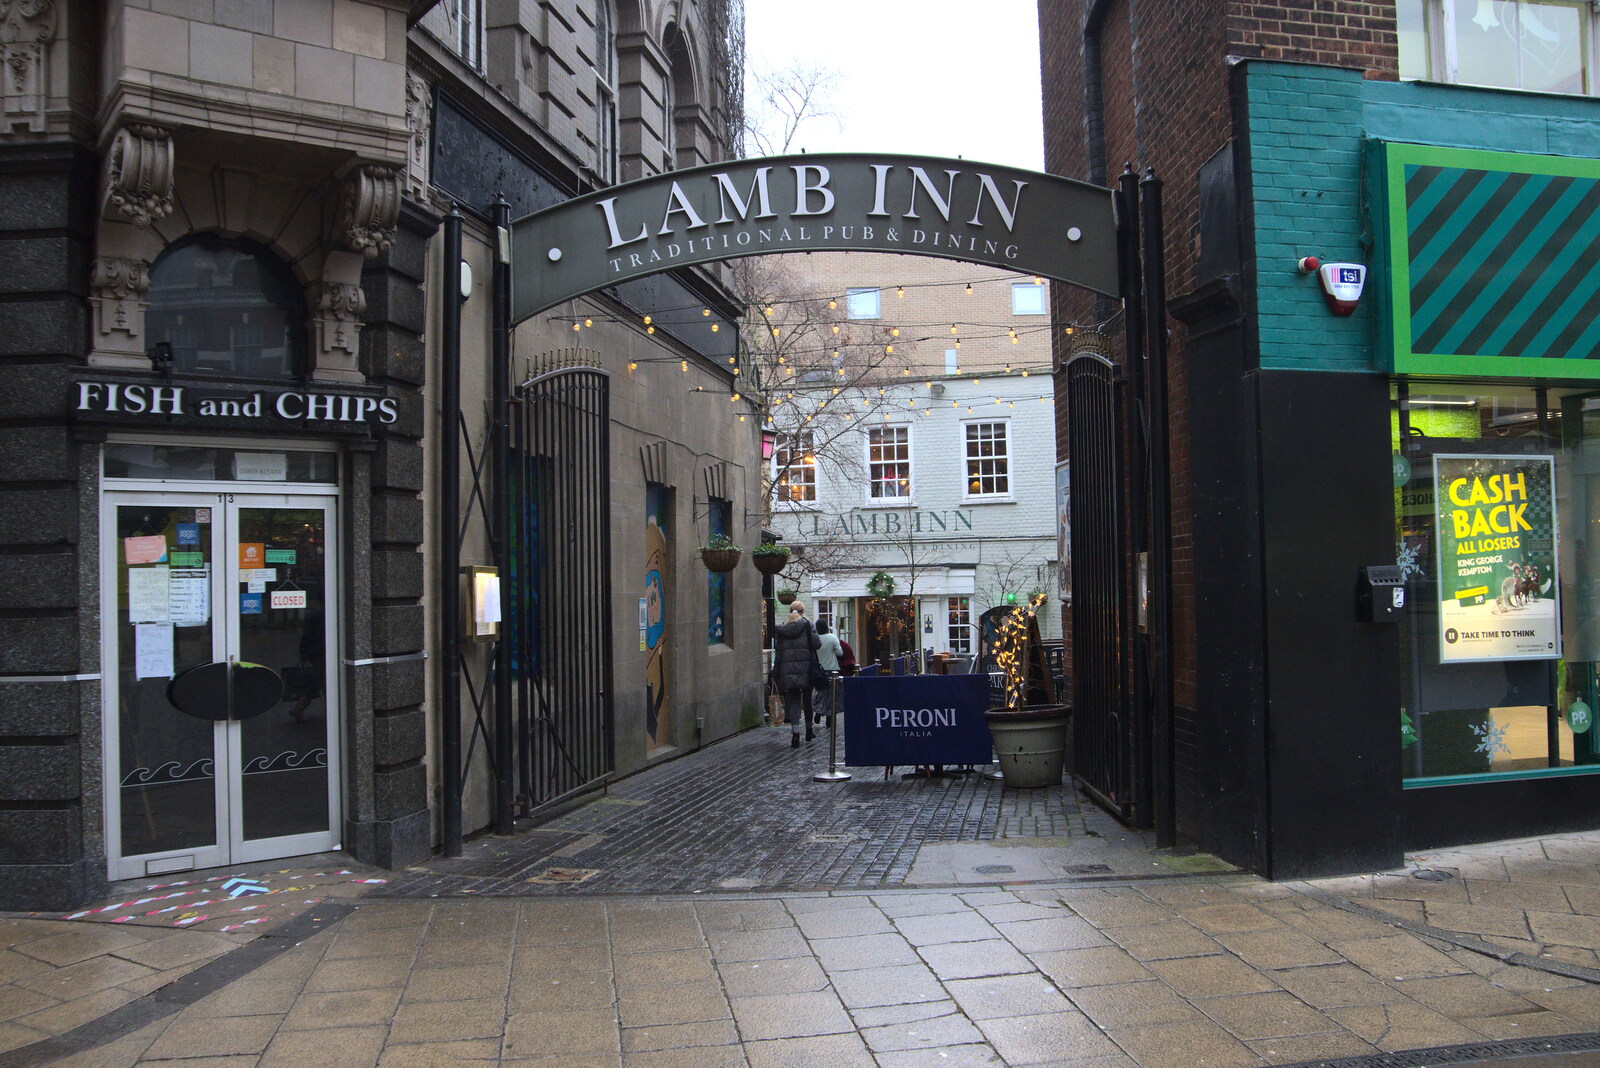 The Lamb Inn from Scooters and a Bit of Christmas Shopping, Eye and Norwich, Norfolk - 23rd December 2021